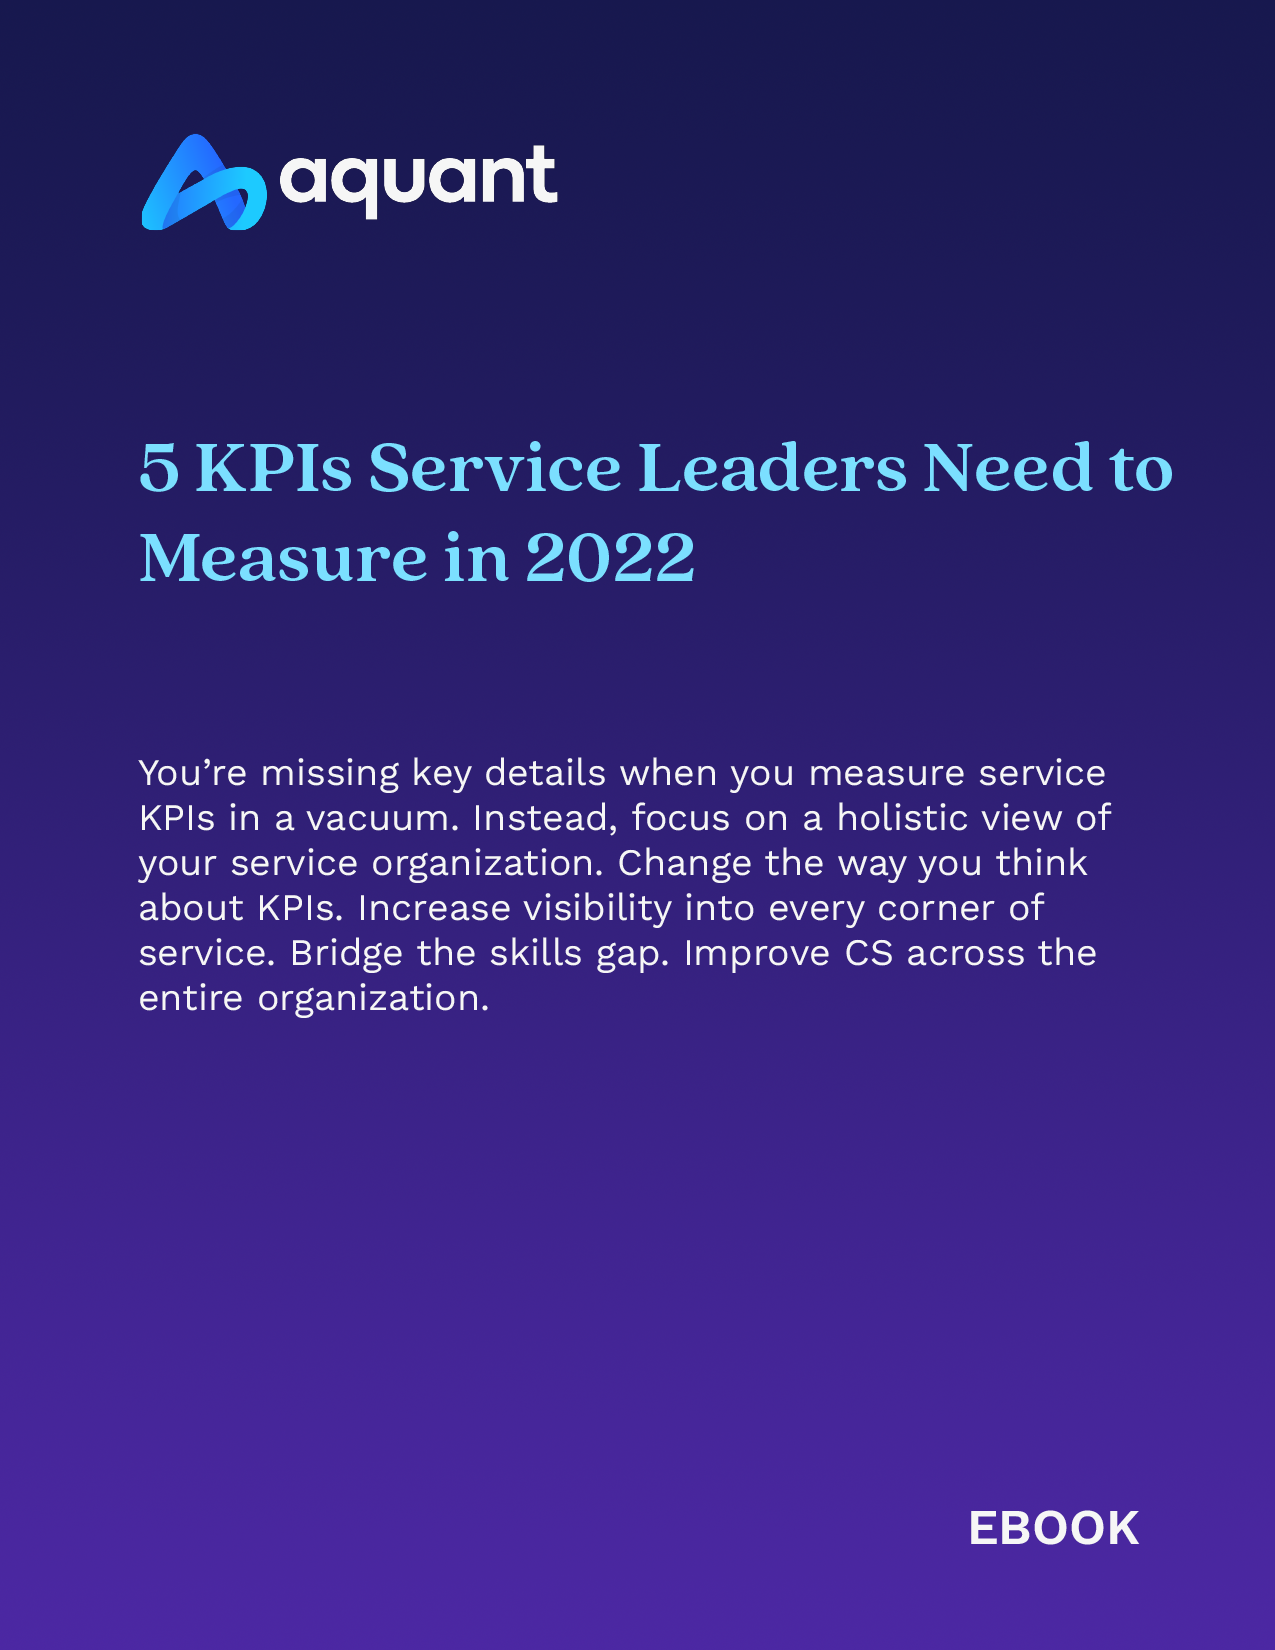 5 KPI's Service Leaders Need to Measure in 2022